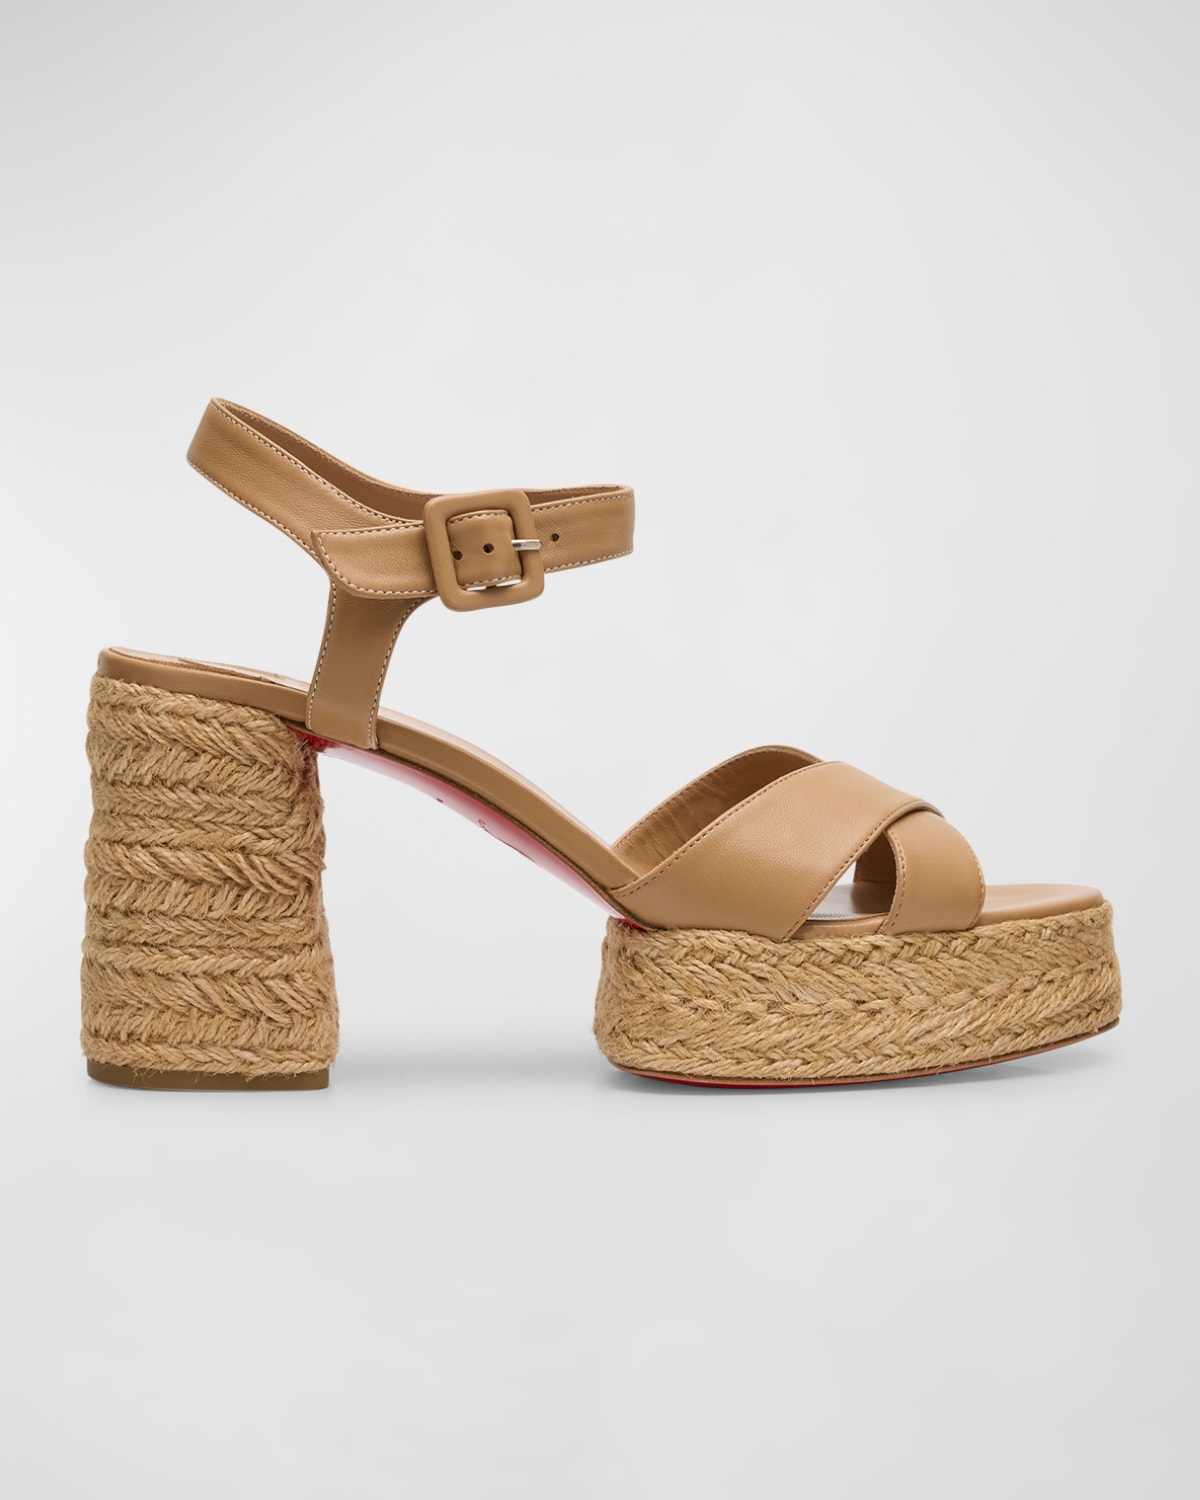 Christian Louboutin Calakala Leather Crisscross Red Sole Espadrille Sandals In Toffee